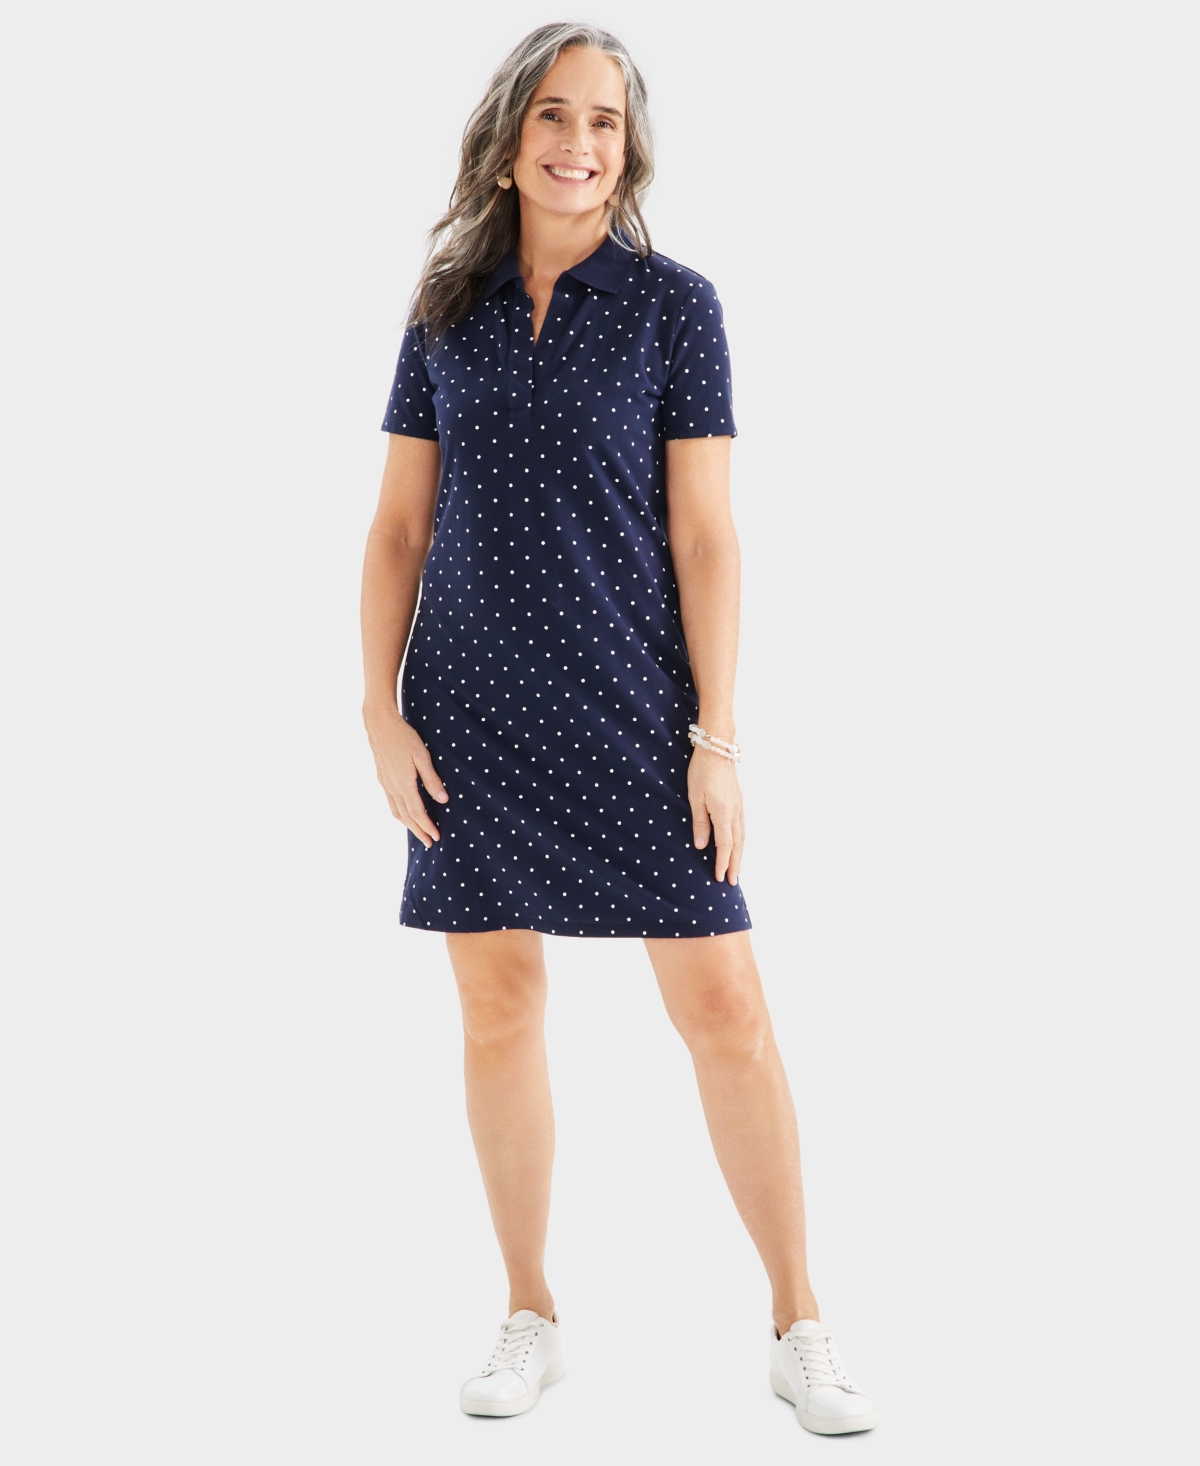 Women's Printed Cotton Polo Dress, Created for Macy's - Dot Blue